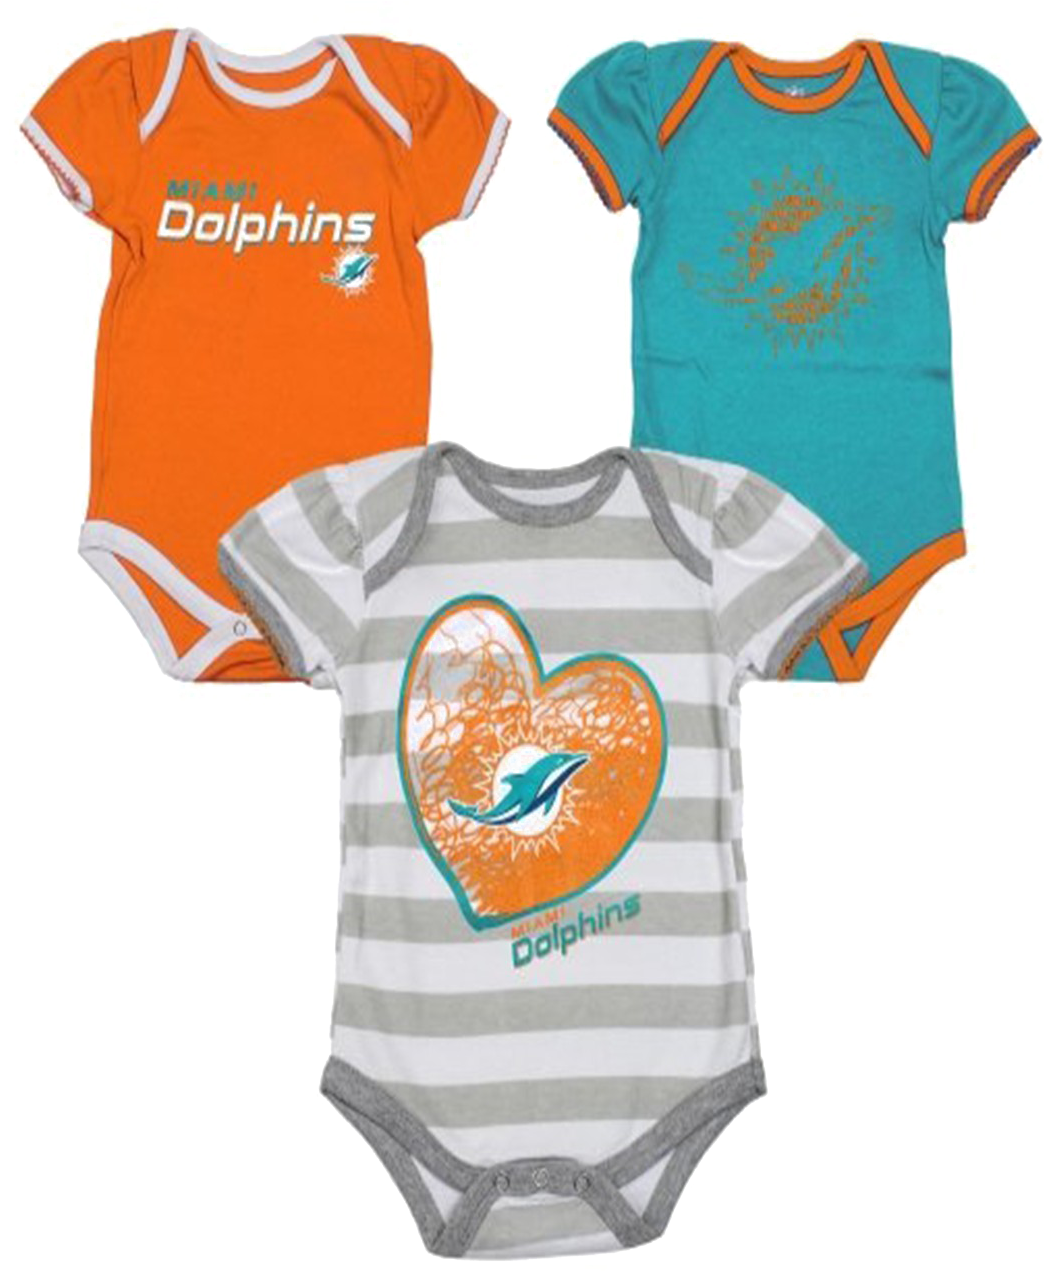 Miami Dolphins Baby Onesies PNG